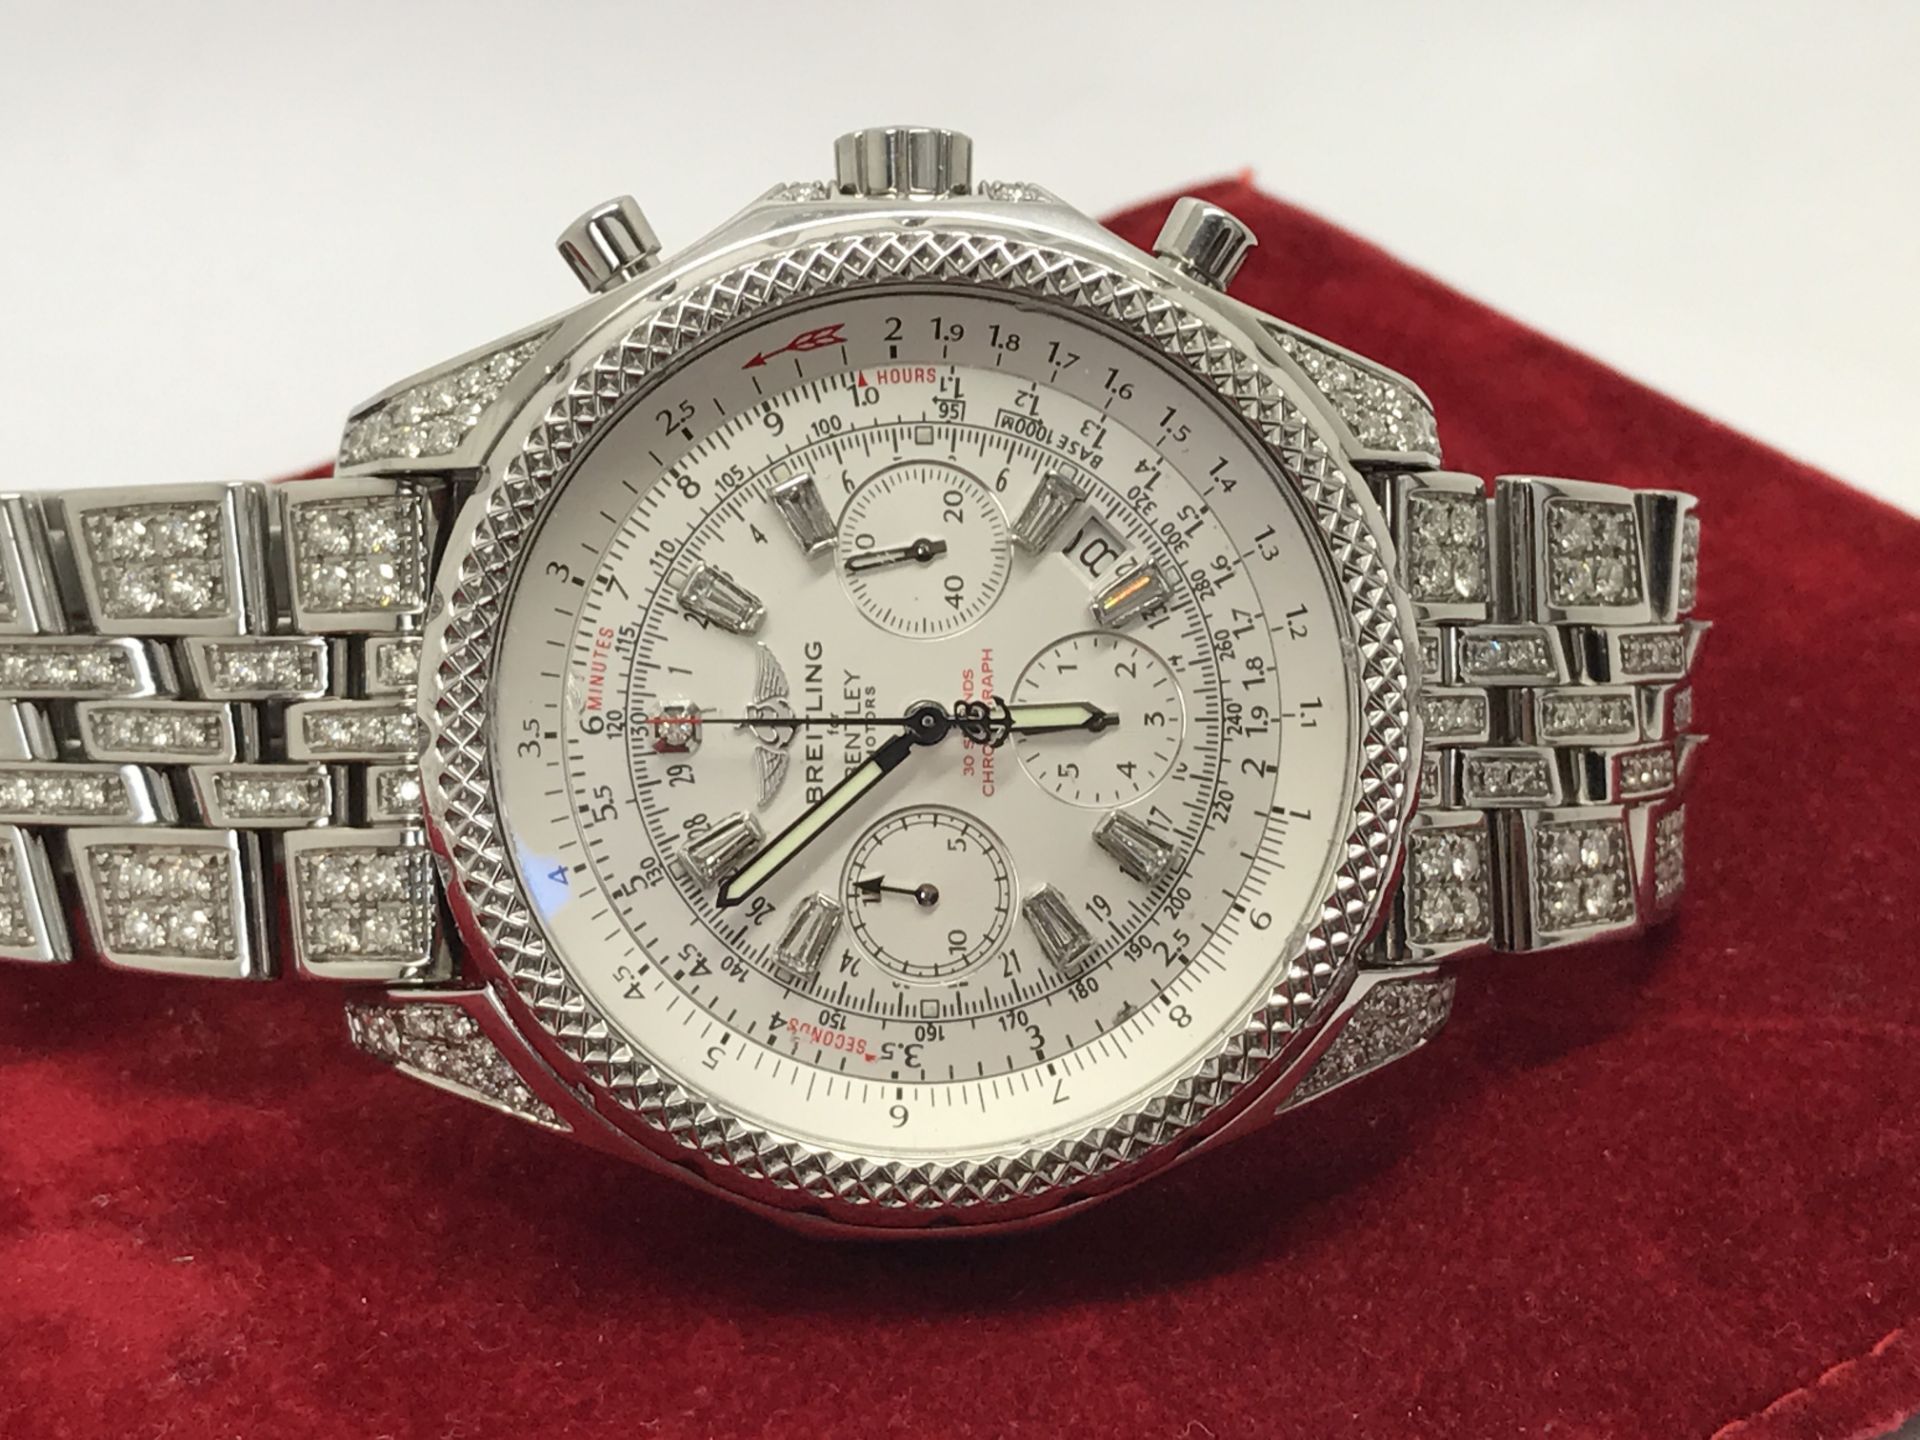 SPECIAL EDITION BREITLING FOR BENTLEY DIAMOND SET WATCH + BOX - Image 13 of 15